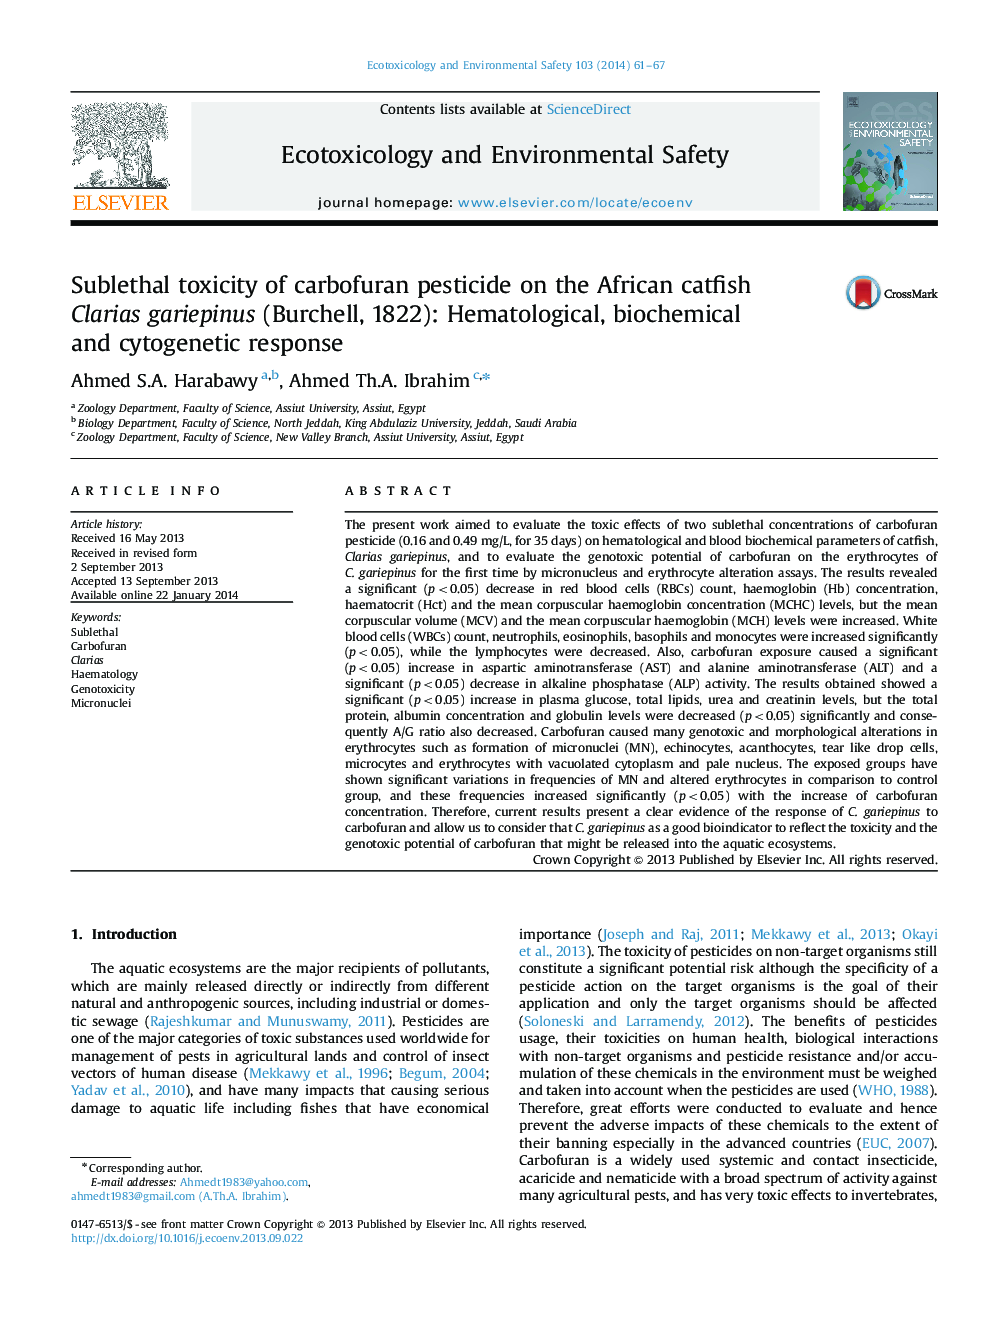 Sublethal toxicity of carbofuran pesticide on the African catfish Clarias gariepinus (Burchell, 1822): Hematological, biochemical and cytogenetic response